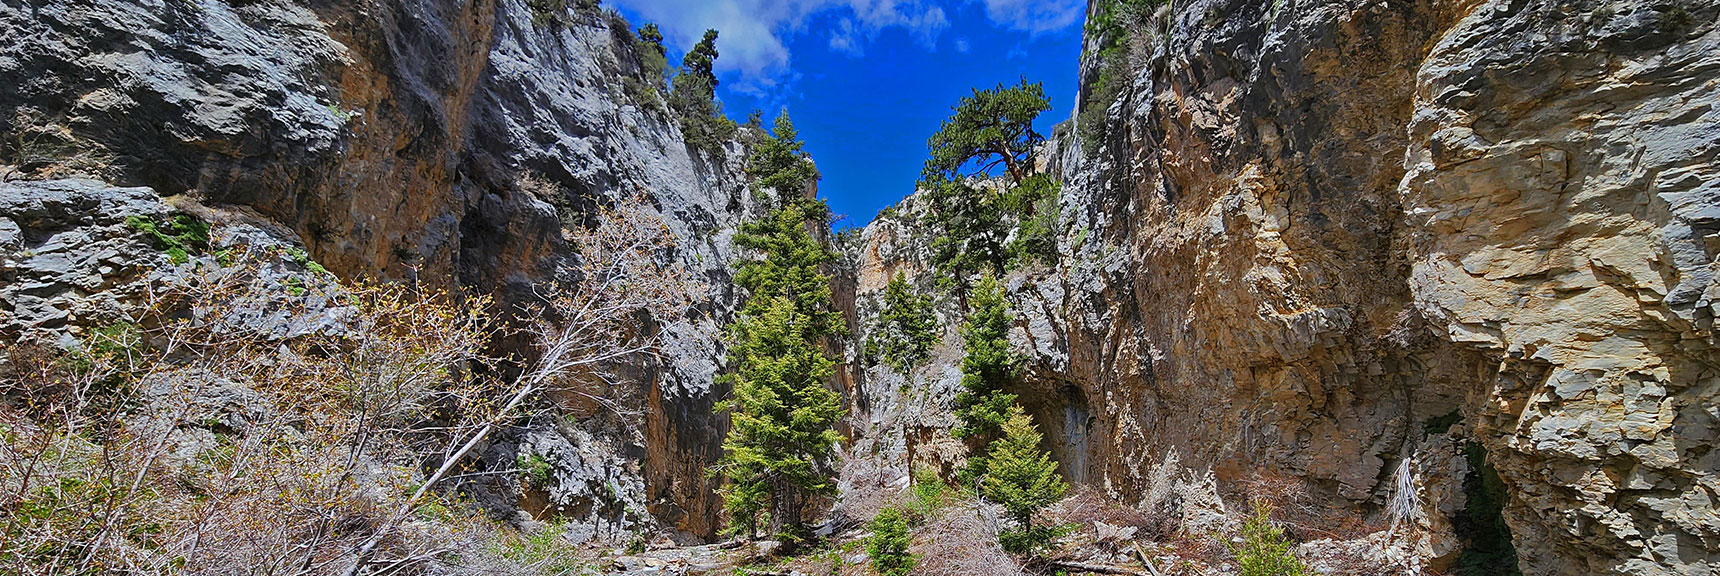 Rock, Water, Trees Create Countless Unique Photo Opportunities | Fletcher Canyon Trail | Mt Charleston Wilderness | Spring Mountains, Nevada